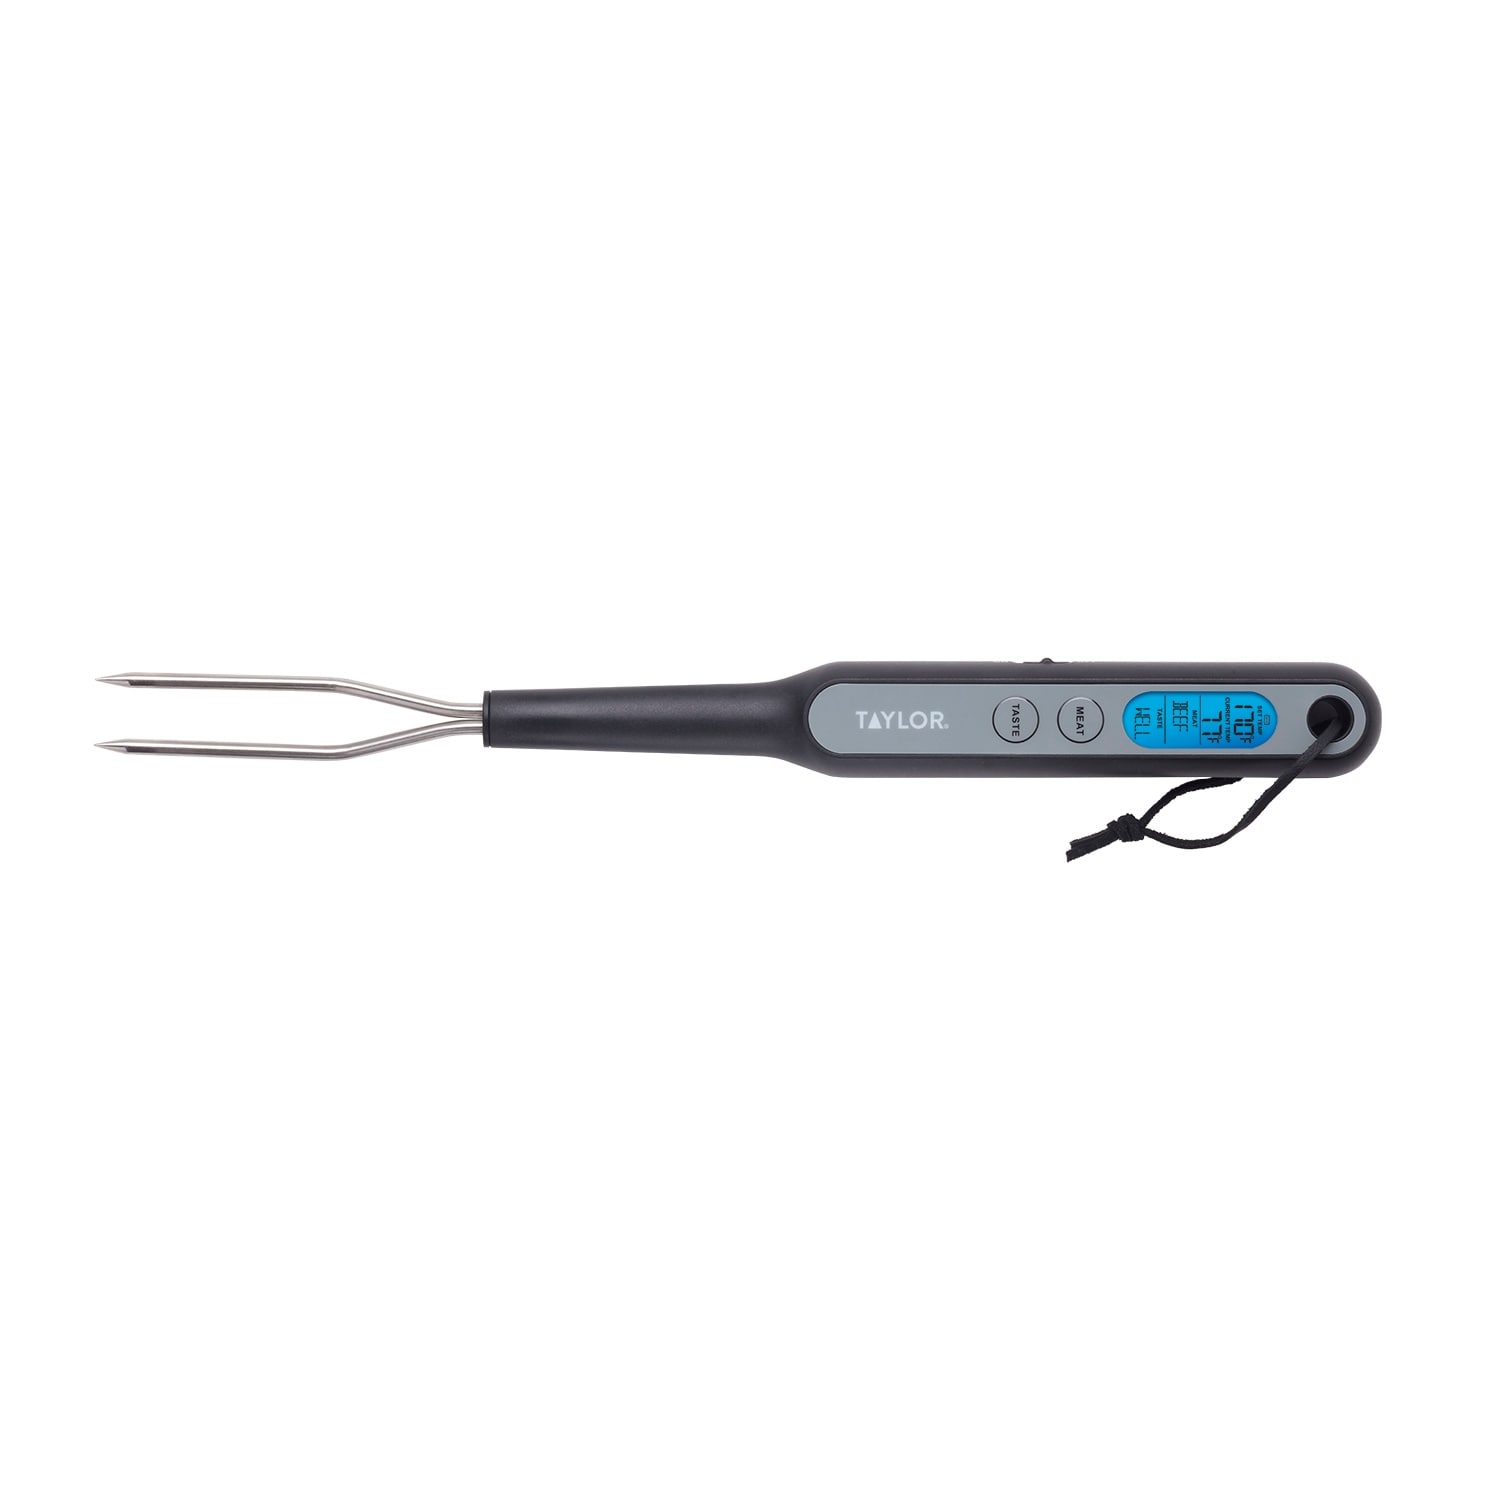 https://ak1.ostkcdn.com/images/products/is/images/direct/8946e5fac2d91441eb2505feedd3b1b0b48ca042/Taylor-Precision-Products-Digital-Fork-Thermometer-with-Preset-Cooking-Temperatures.jpg